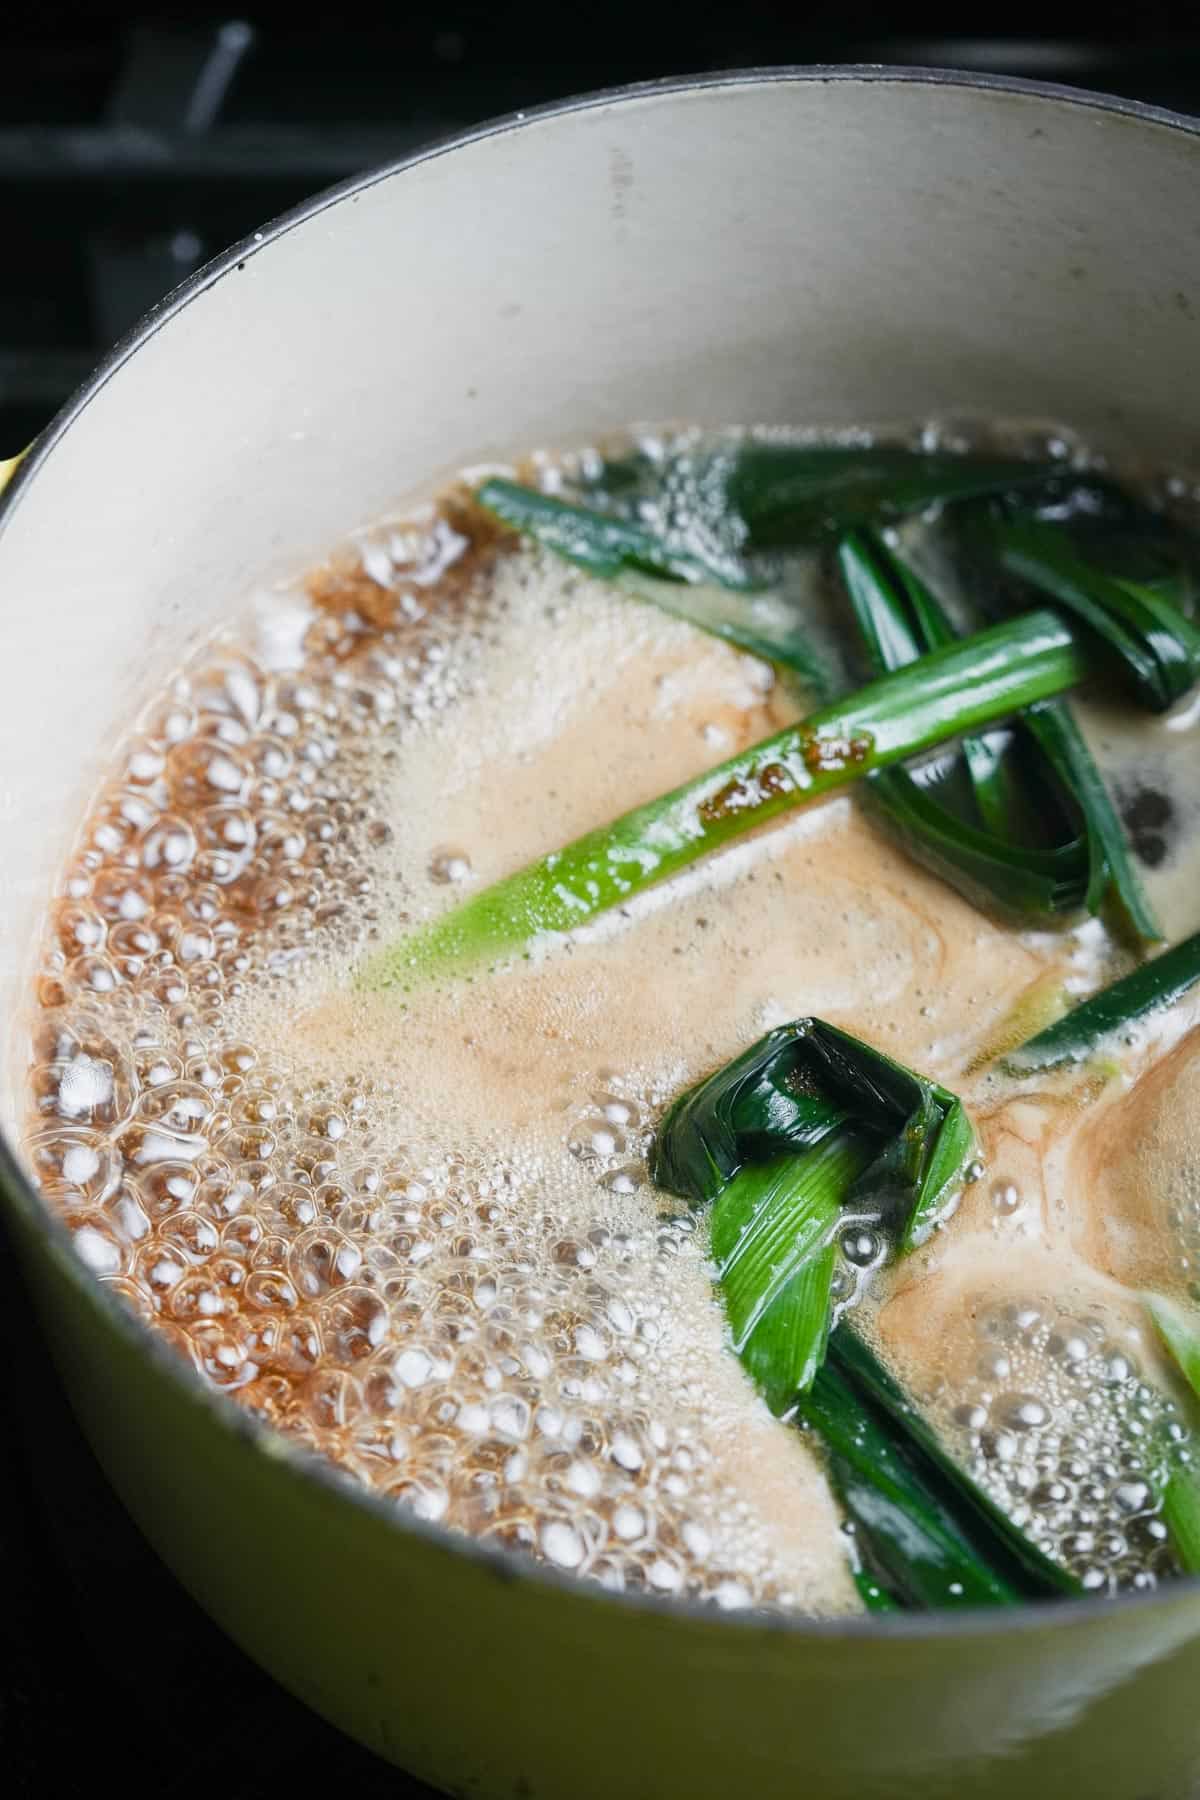 A pot filled with water and pandan leaves, boiling on a stove.